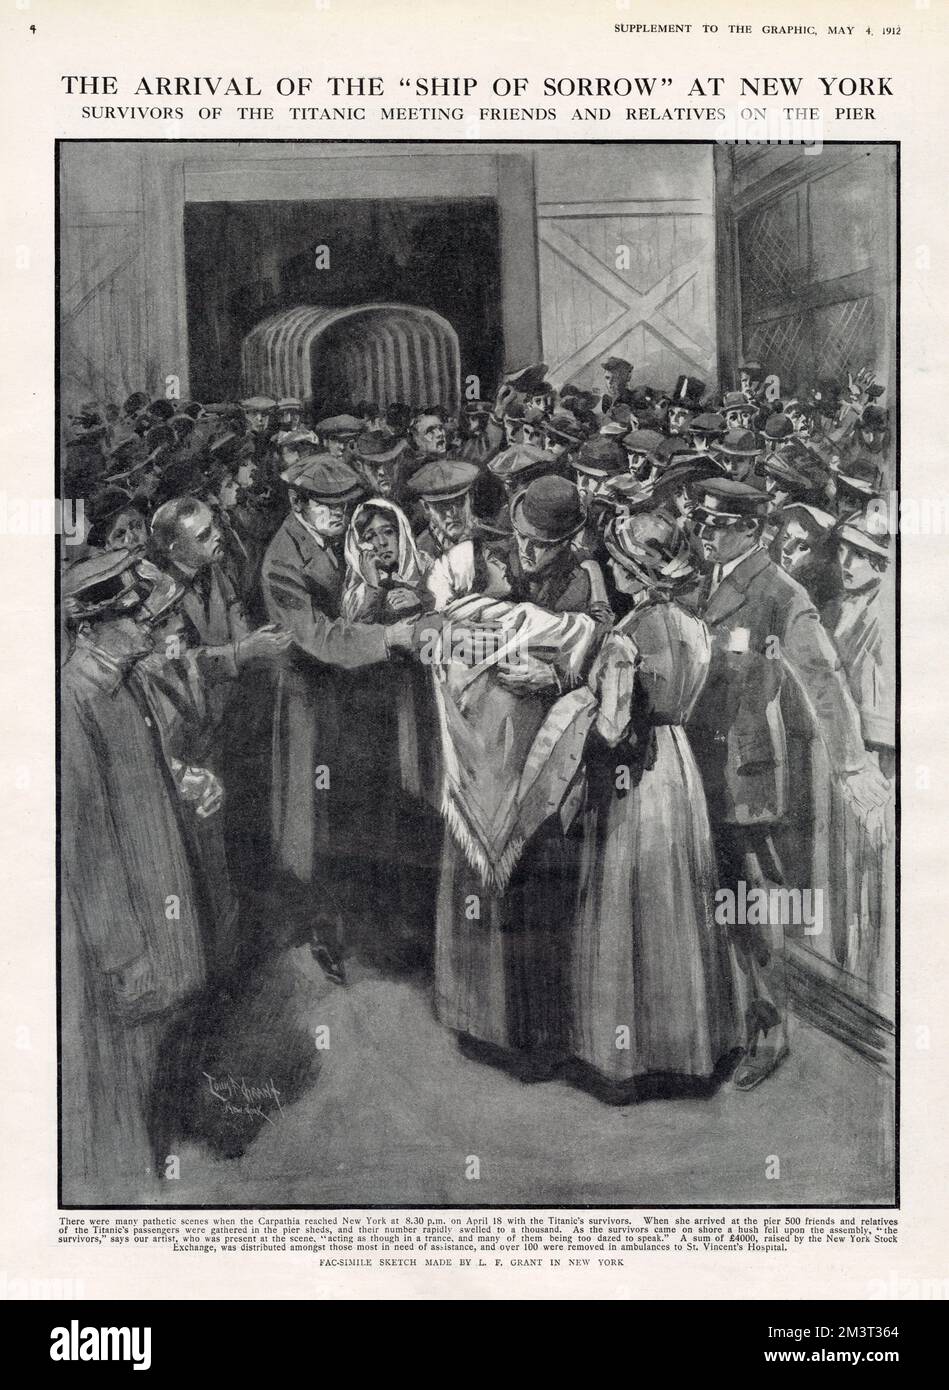 The arrival of the 'Ship of Sorrow' at New York. Survivors of the Titanic meeting friends and relatives on the pier. The Carpathia reached New York, USA, at 8.30pm on 18th April with the Titanic's survivors. When she arrived at the pier 500 friends and relatives of the Titanic's passengers were gathered in the pier sheds, and their number rapidly swelled to a thousand. As the survivors came on shore a hush fell upon the assembly. Over 100 survivors were taken in ambulances to St Vincent's Hospital. Stock Photo